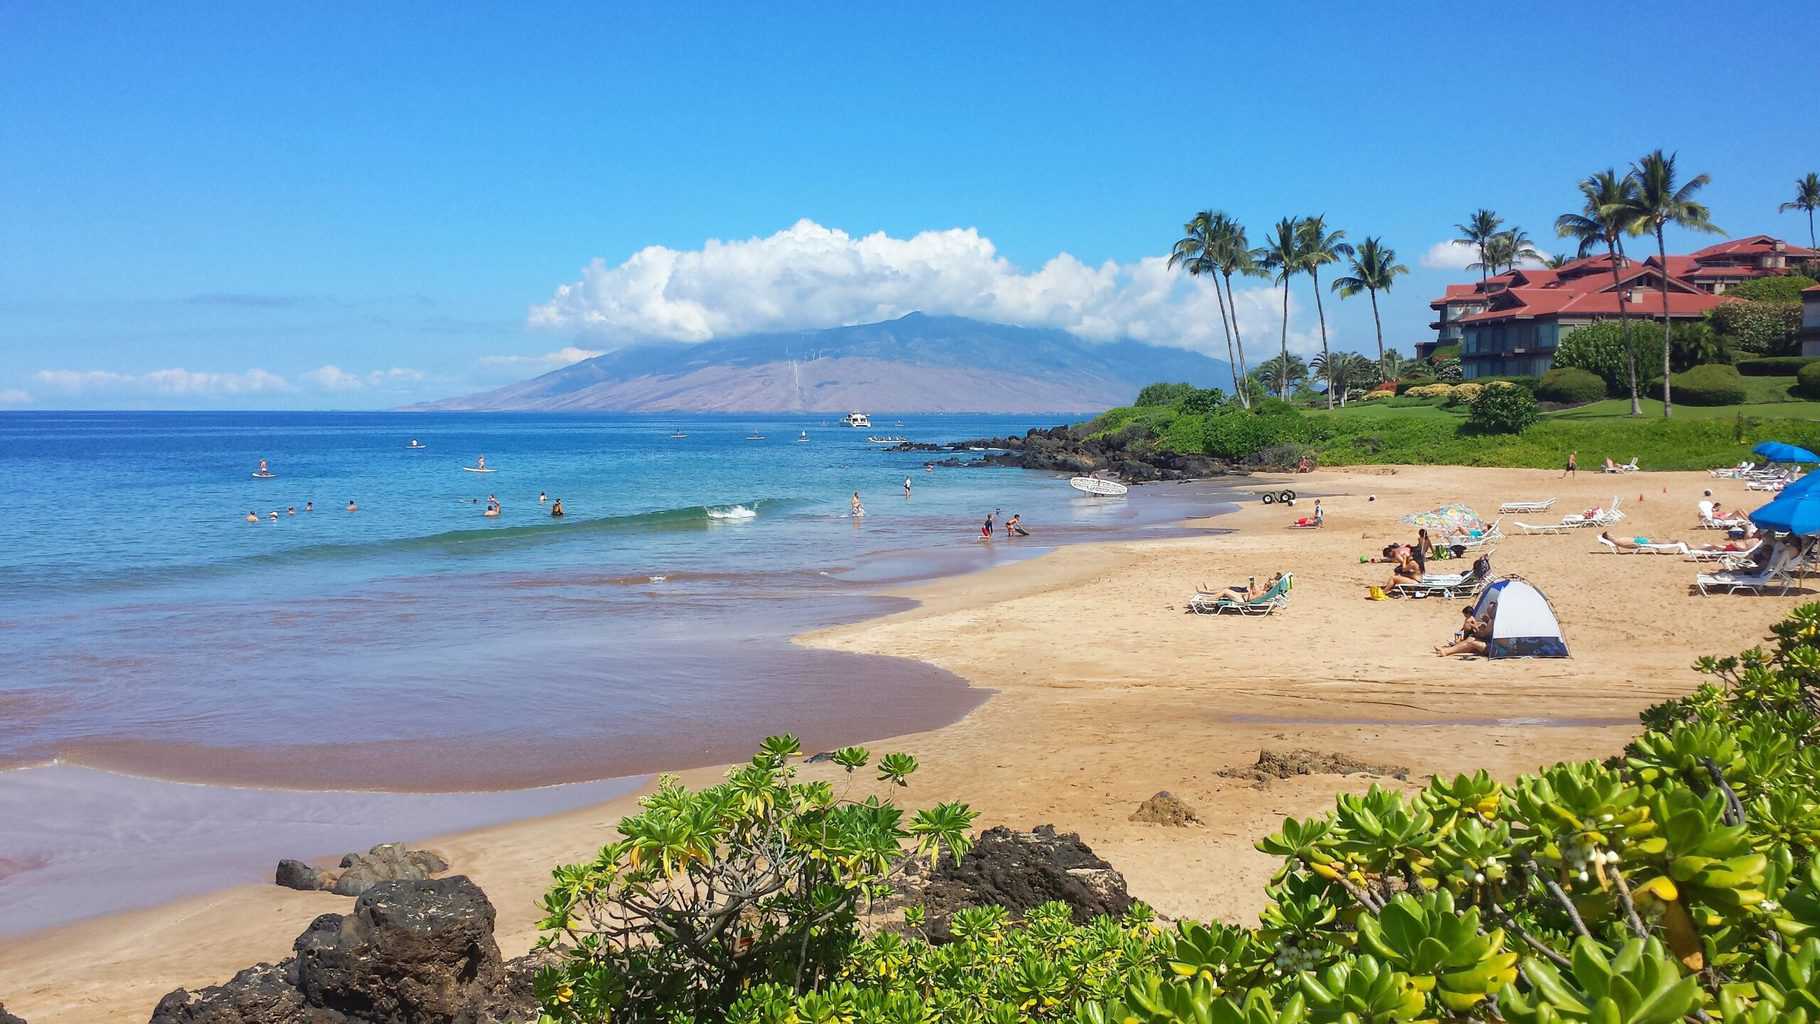 Polo Beach right next to The Fairmont Kea Lani Resort and Spa and to Wailea Point Condominiums. Photo taken by Jeannie Kong